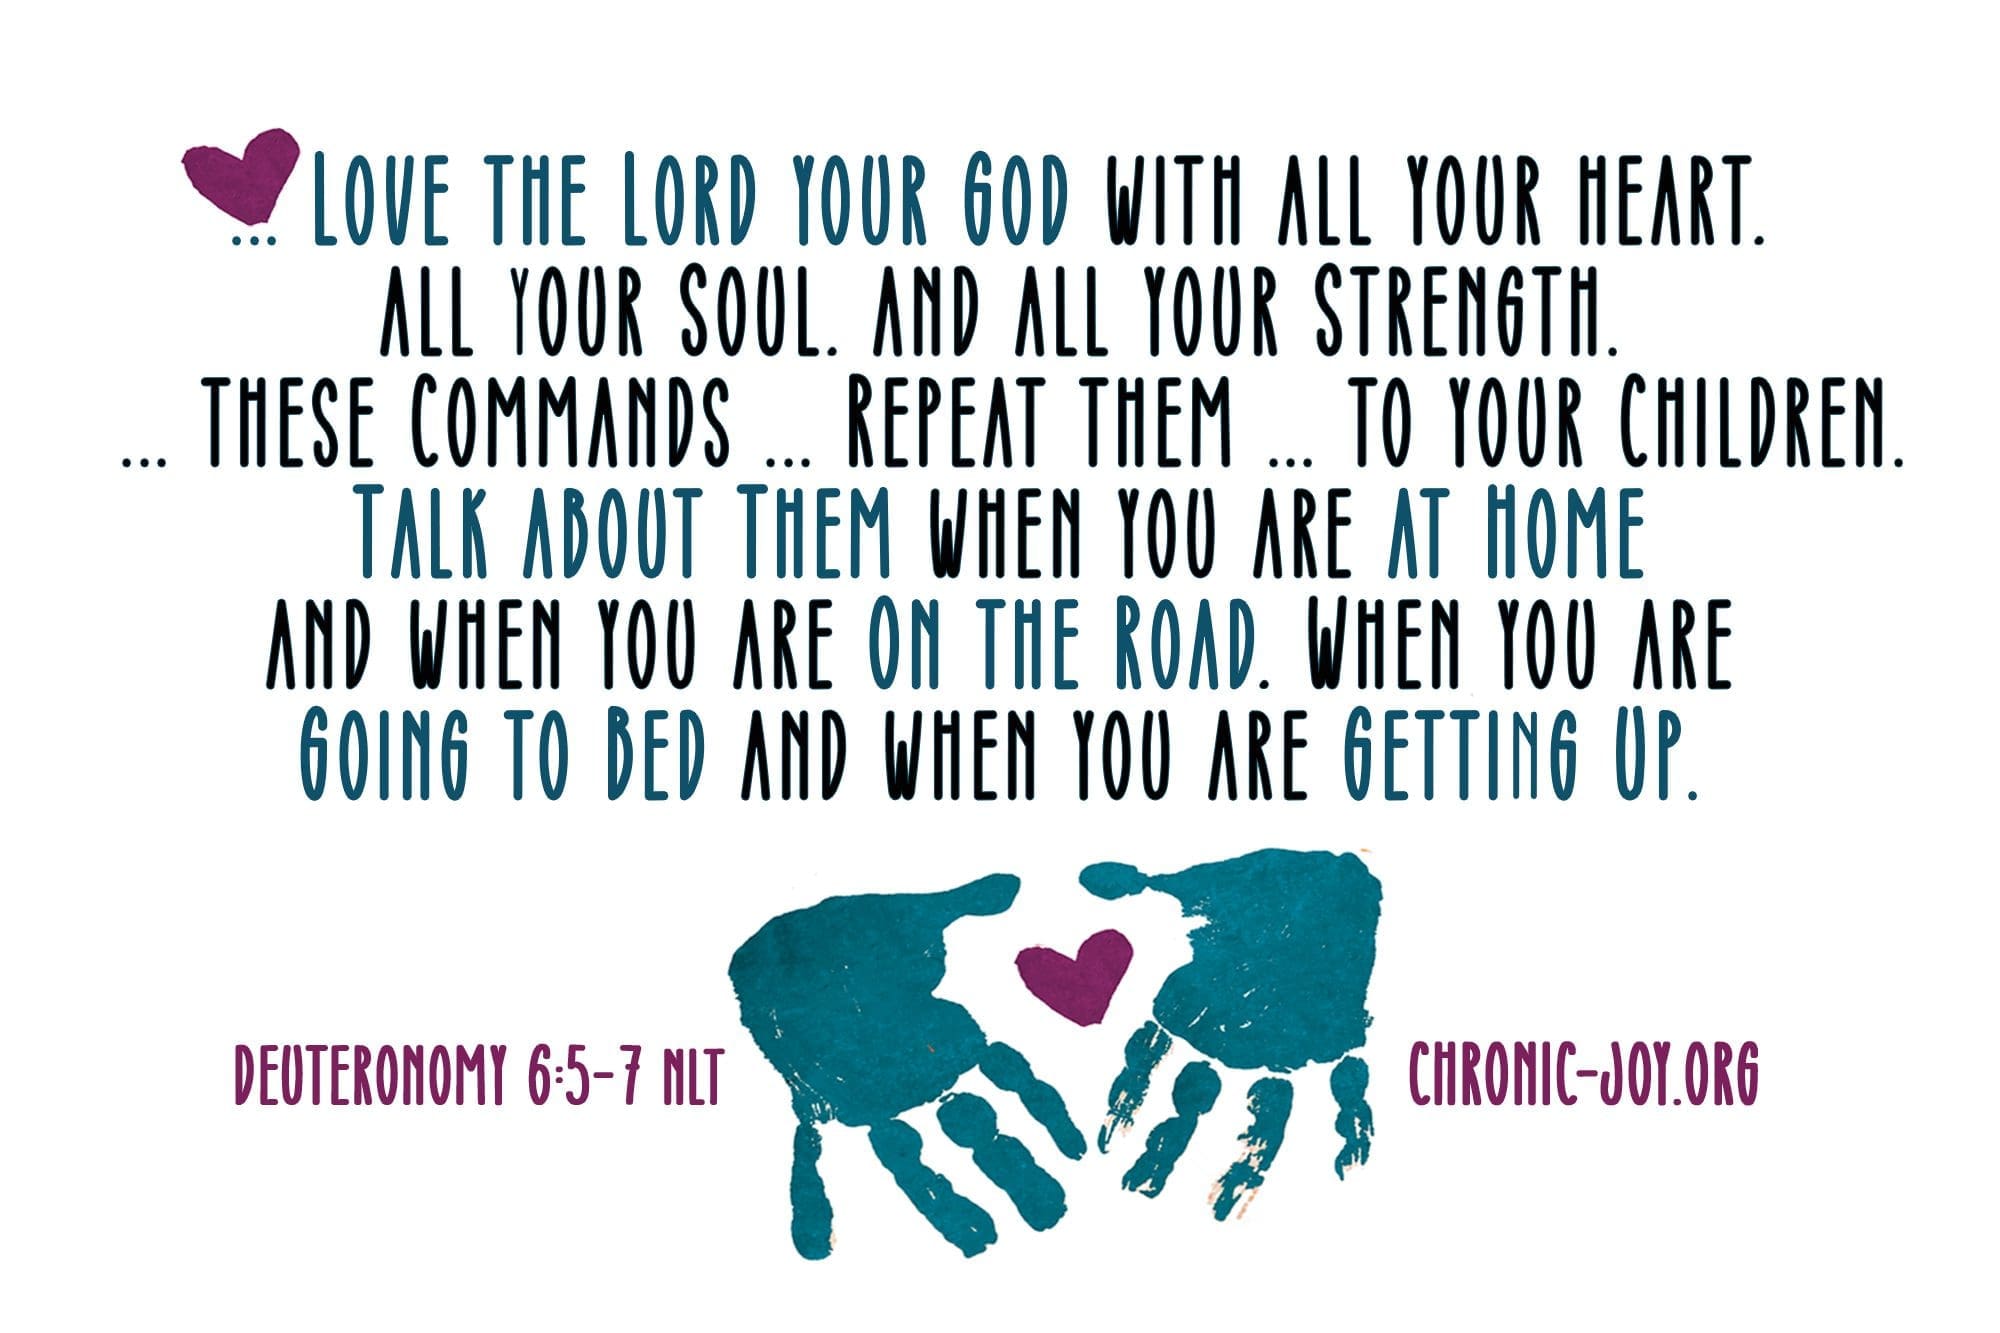 "Love the Lord your God with all your heart, all your soul, and all your strength. ... These commands ... repeat them ... to your children. Talk about them when you are at home and when you are on the road, when you are going to bed and when you are gettin up." Deuteronomy 6:5-7 NLT